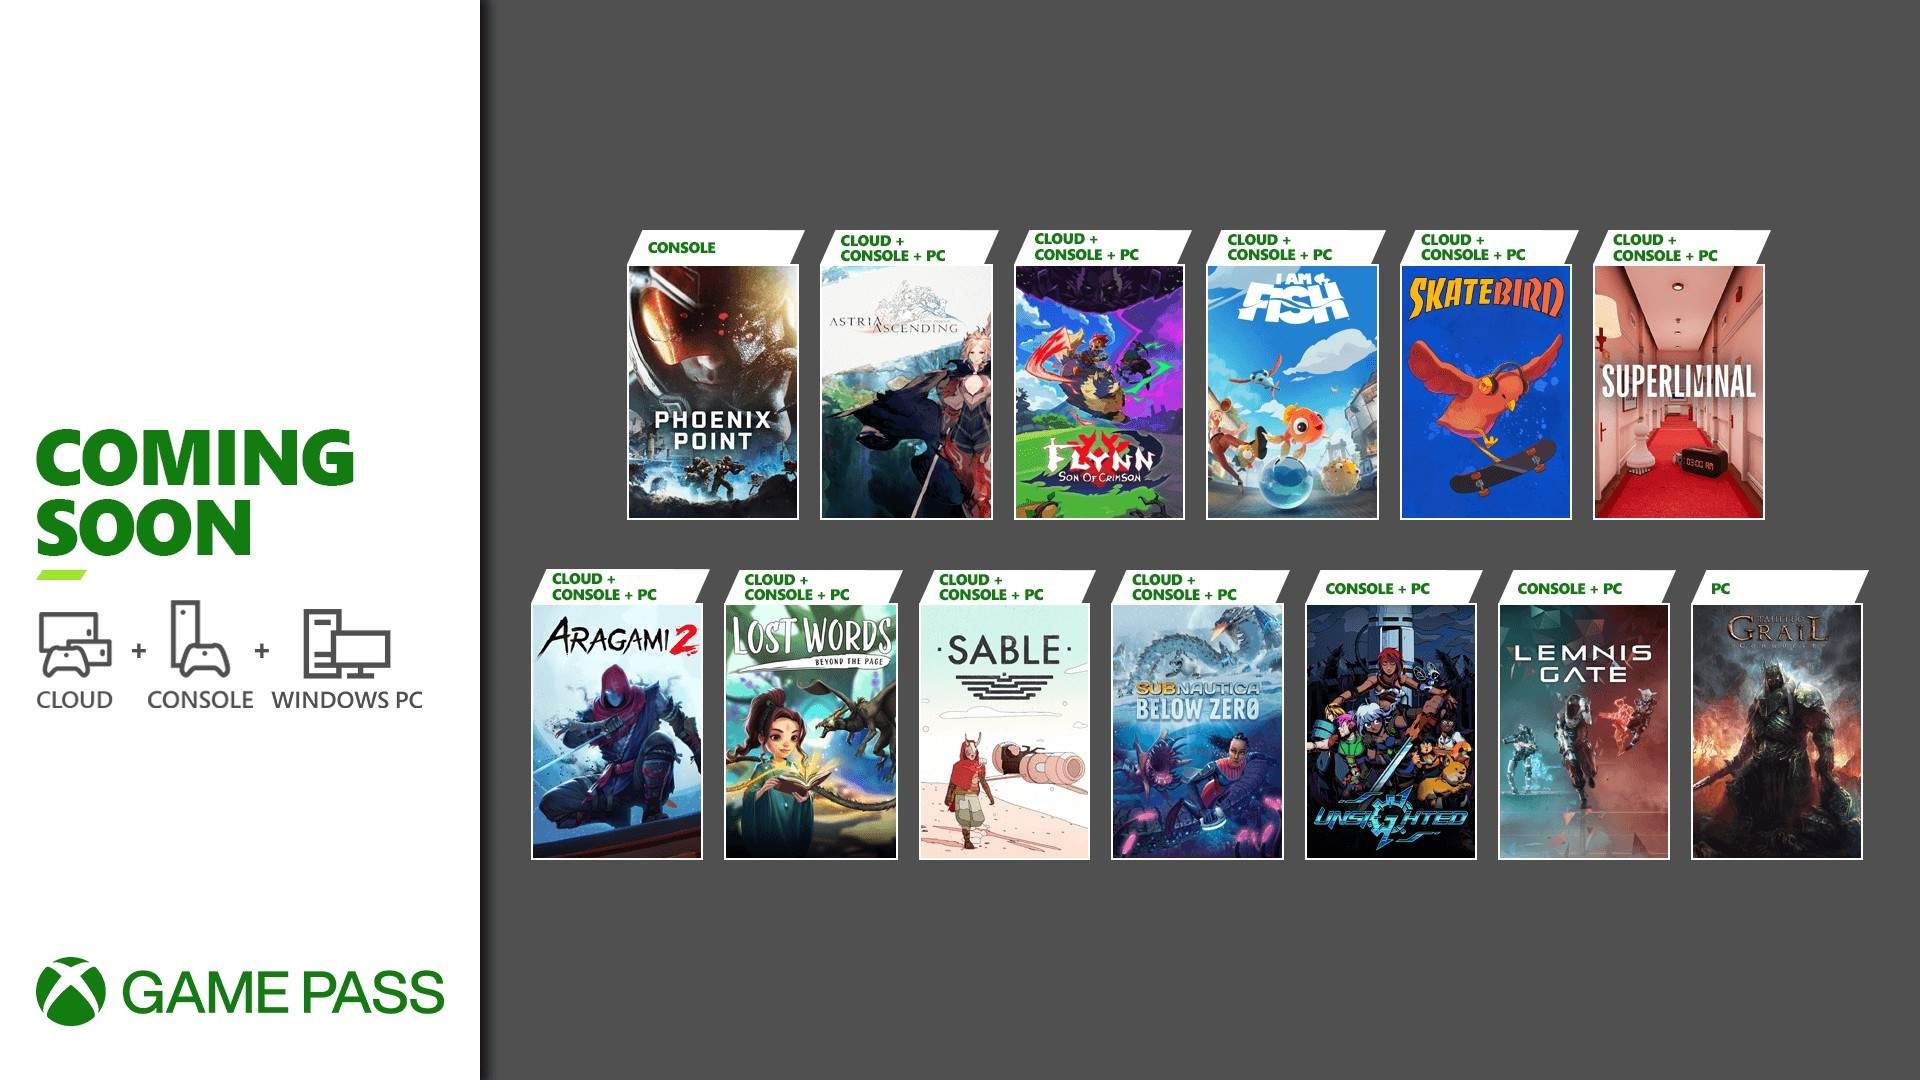 Coming Soon to Xbox Game Pass for Android, Console, and PC: Celeste, Grim  Fandango, PUBG and More - Xbox Wire